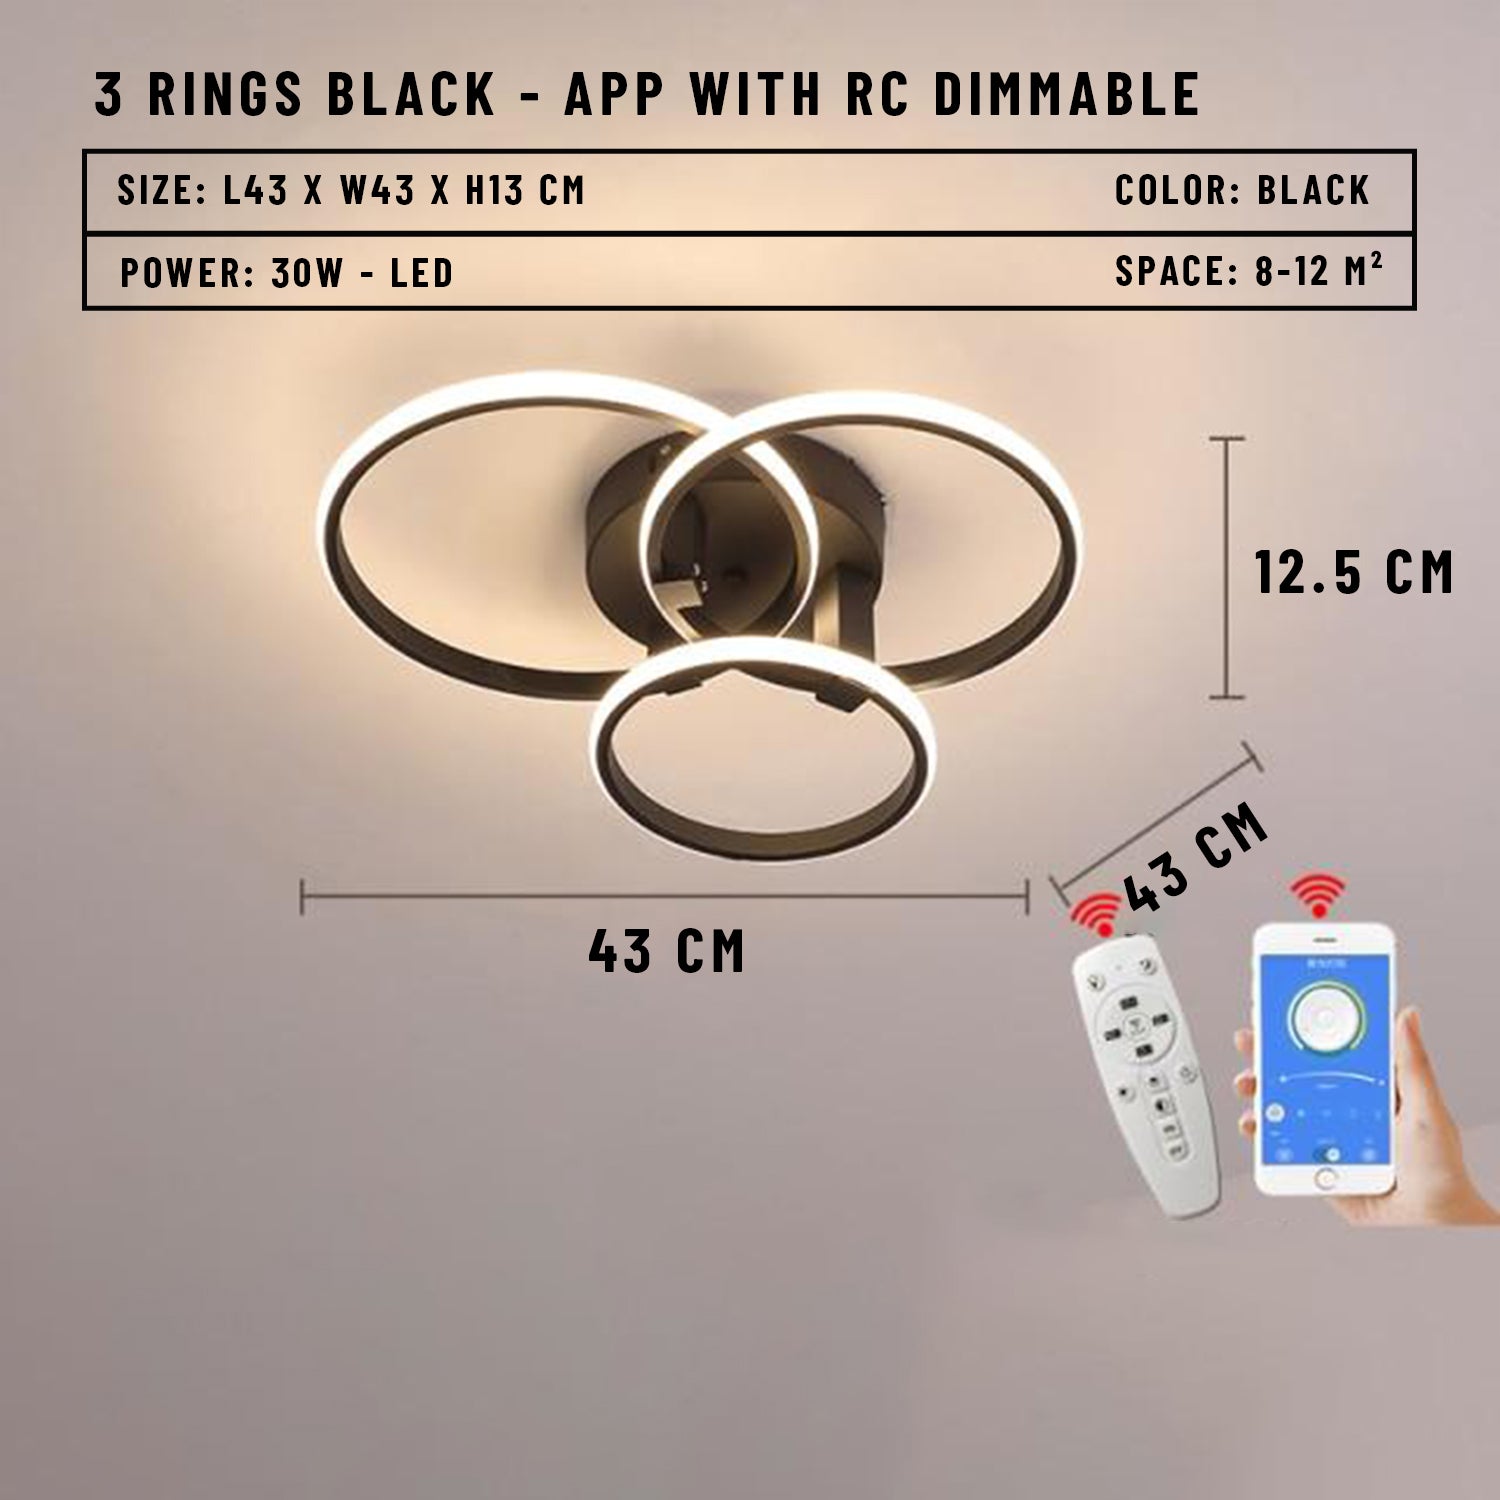 Blastric LED Dimmable Circle Rings Ceiling Light - 3 Rings Black / APP With RC Dimmable - Level Decor